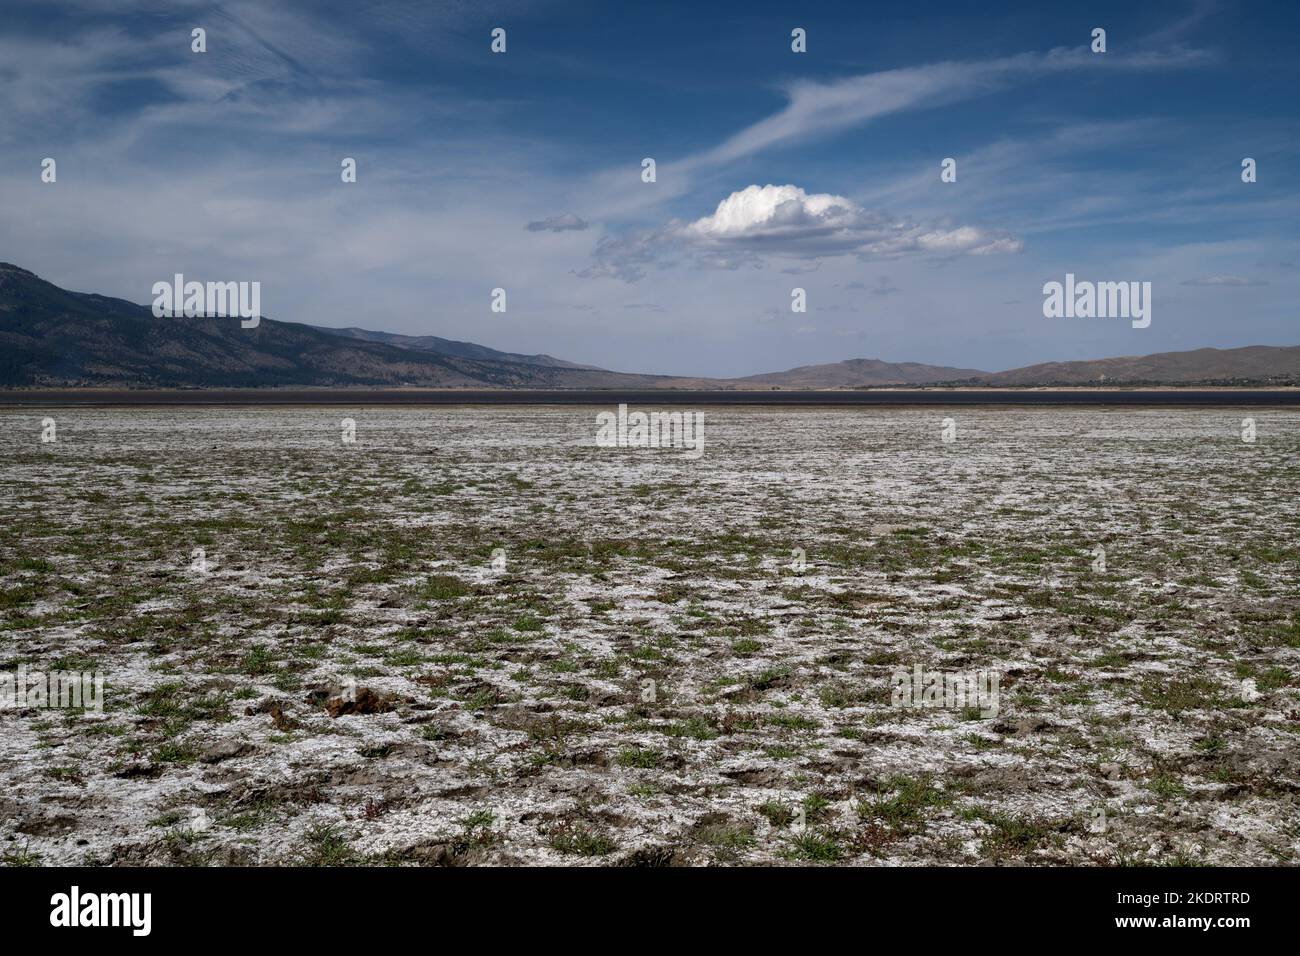 Washoe Lake State Park high desert landscape featuring a cloud in the distance on a blue sky day copy-space and green grass, Nevada, USA Stock Photo